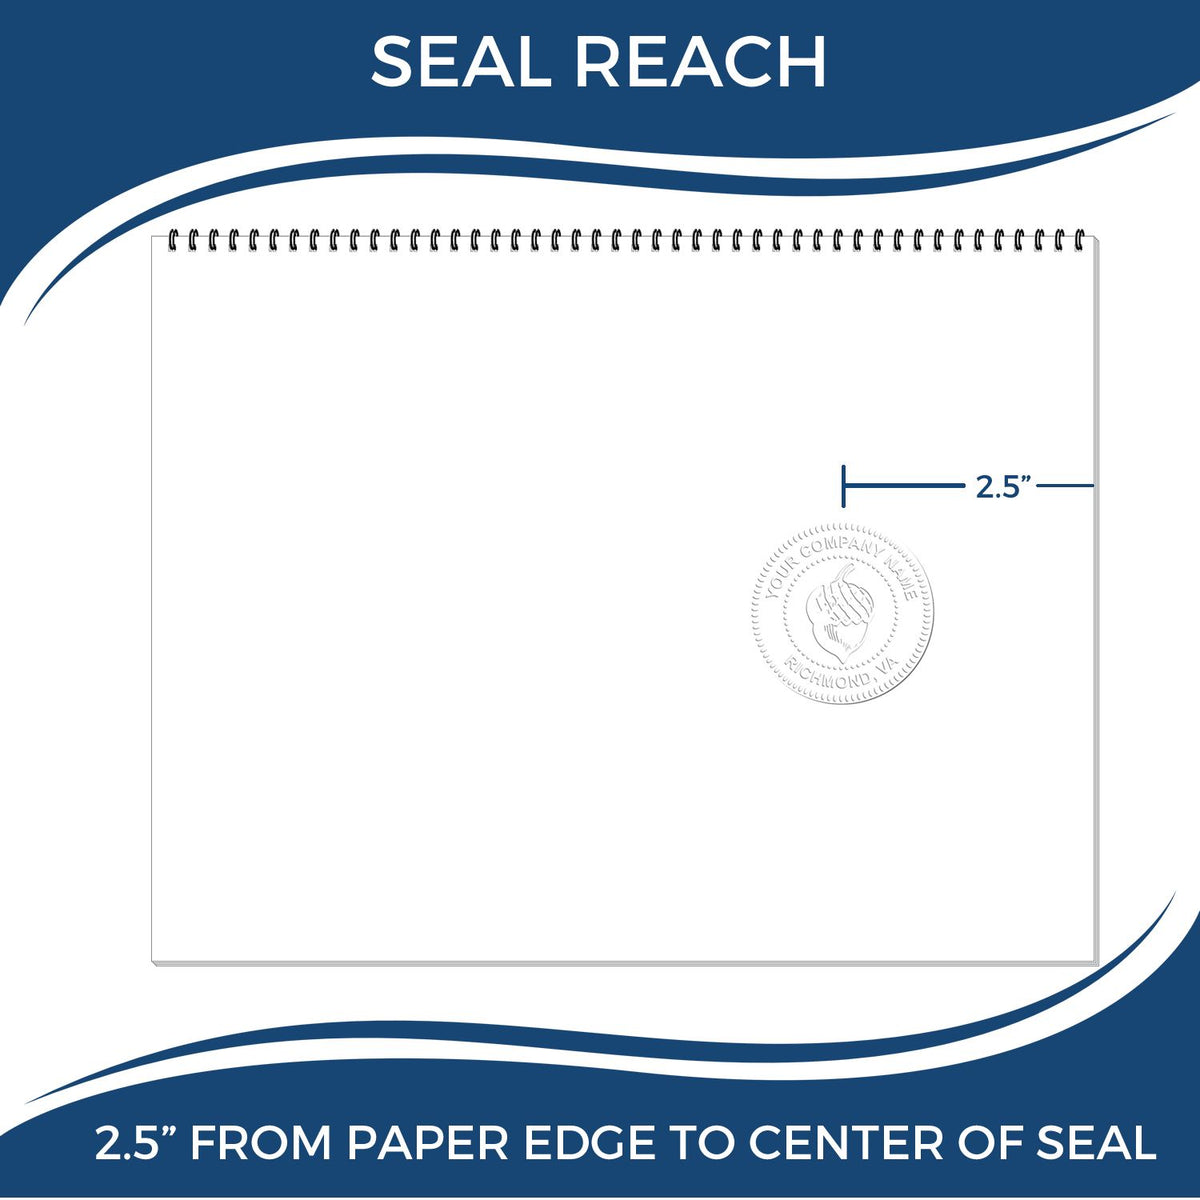 An infographic showing the seal reach which is represented by a ruler and a miniature seal image of the Heavy Duty Cast Iron Nevada Land Surveyor Seal Embosser